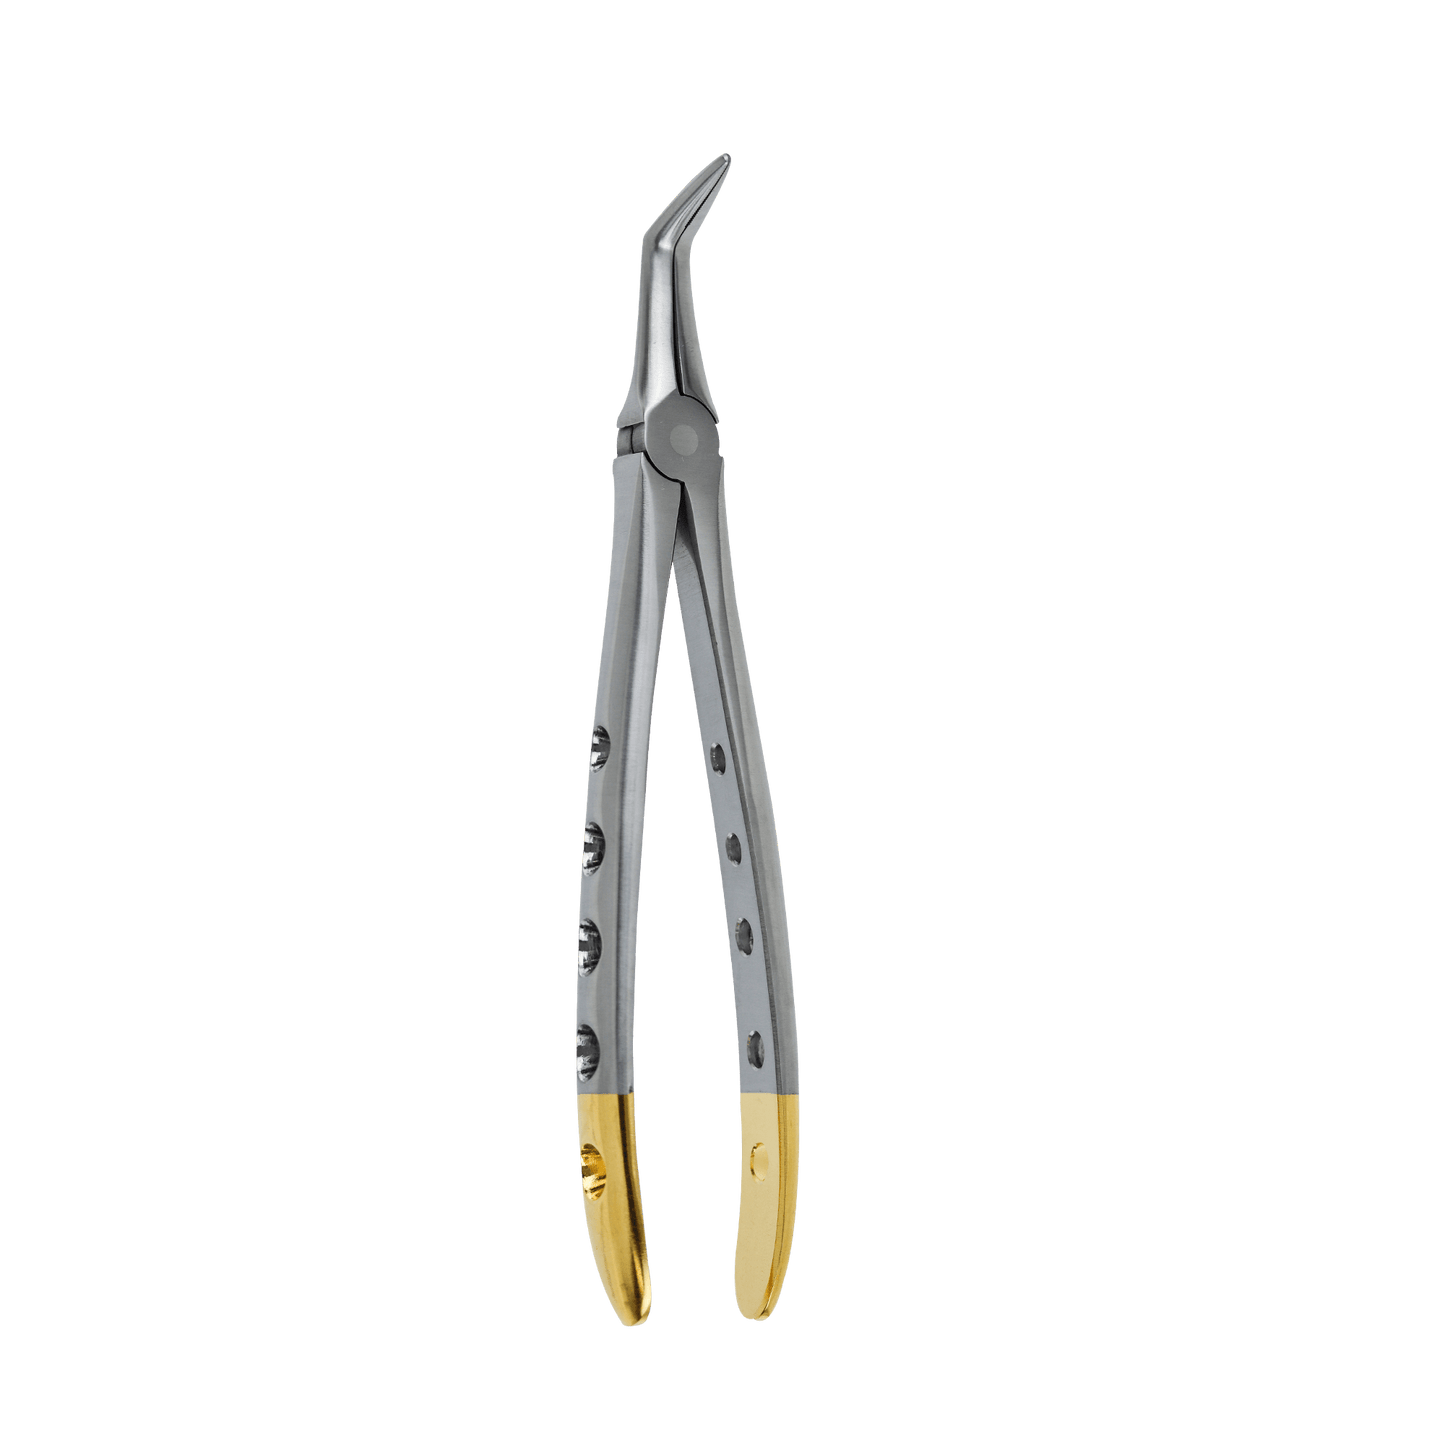 Atraumatic Extraction Forcep-Lower Root Extra Long